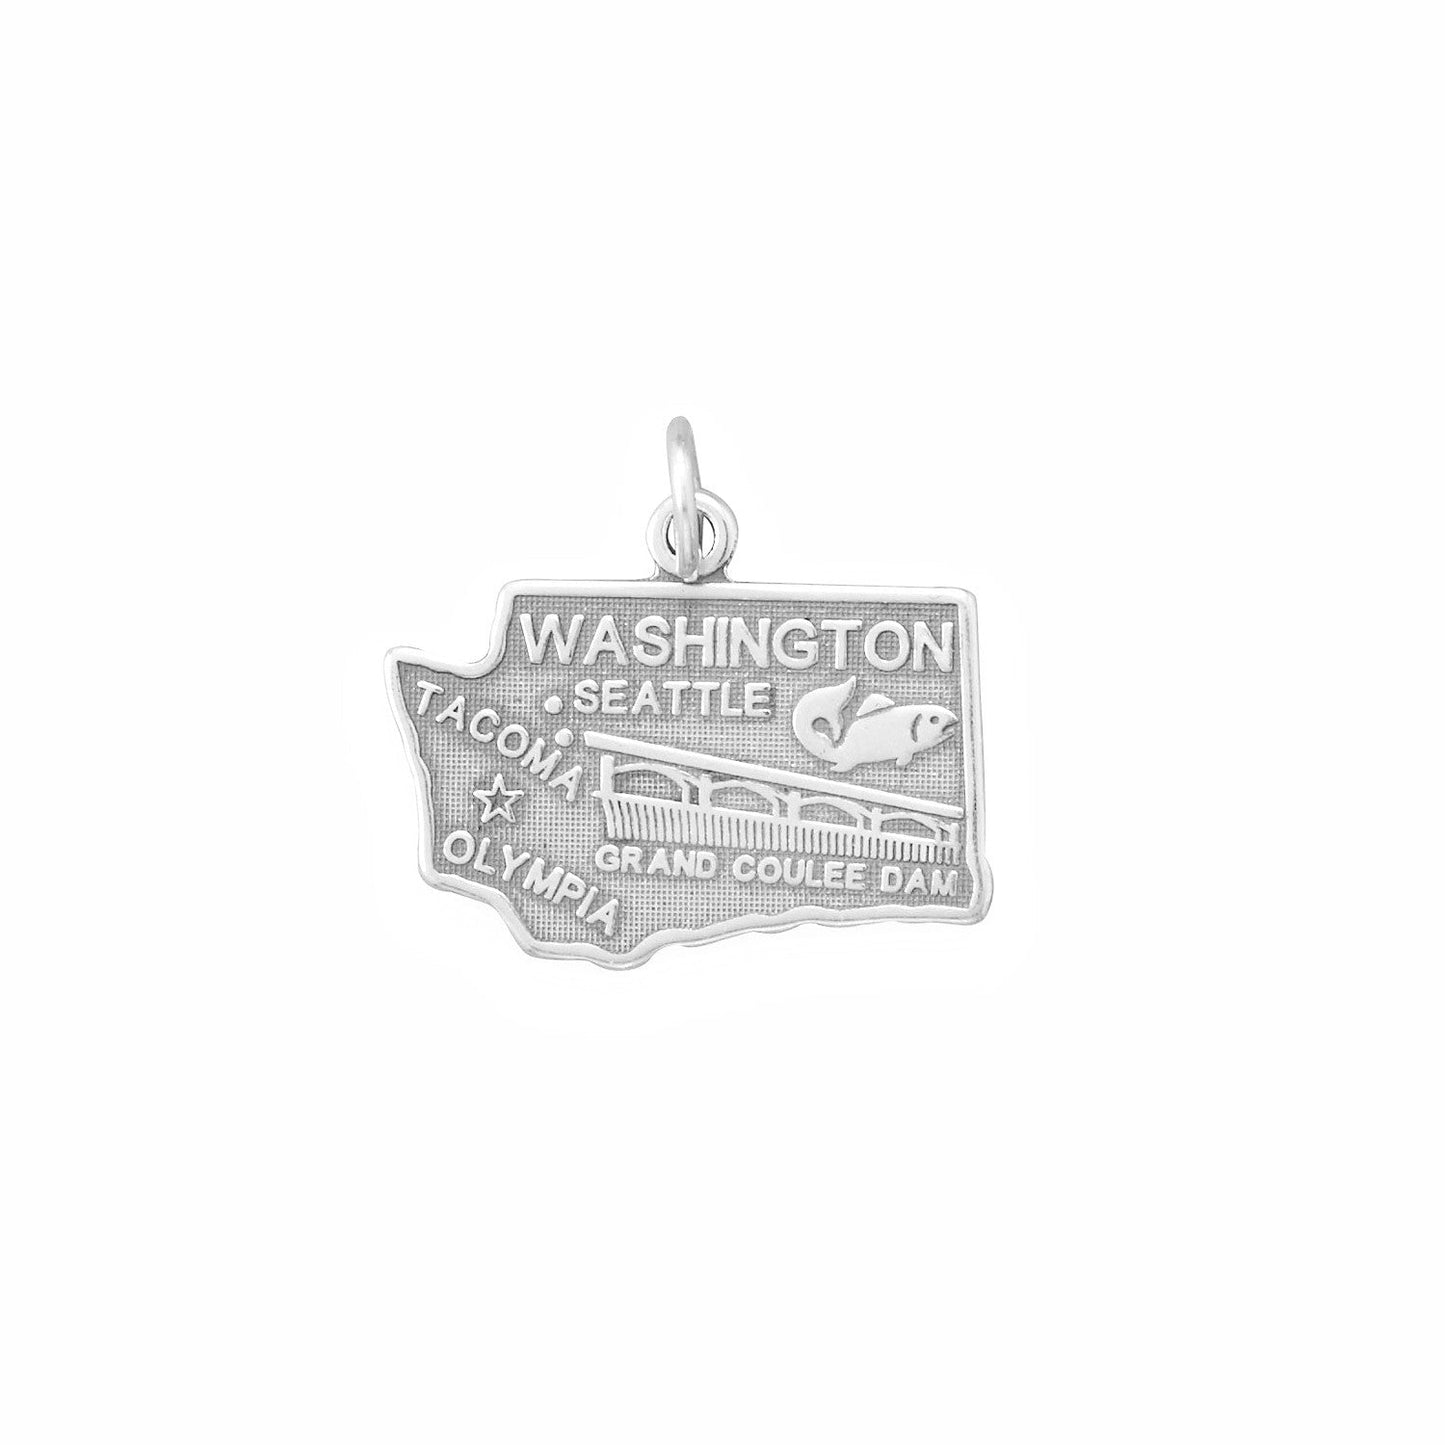 Oxidized Sterling Silver Washington State Charm, Made in USA